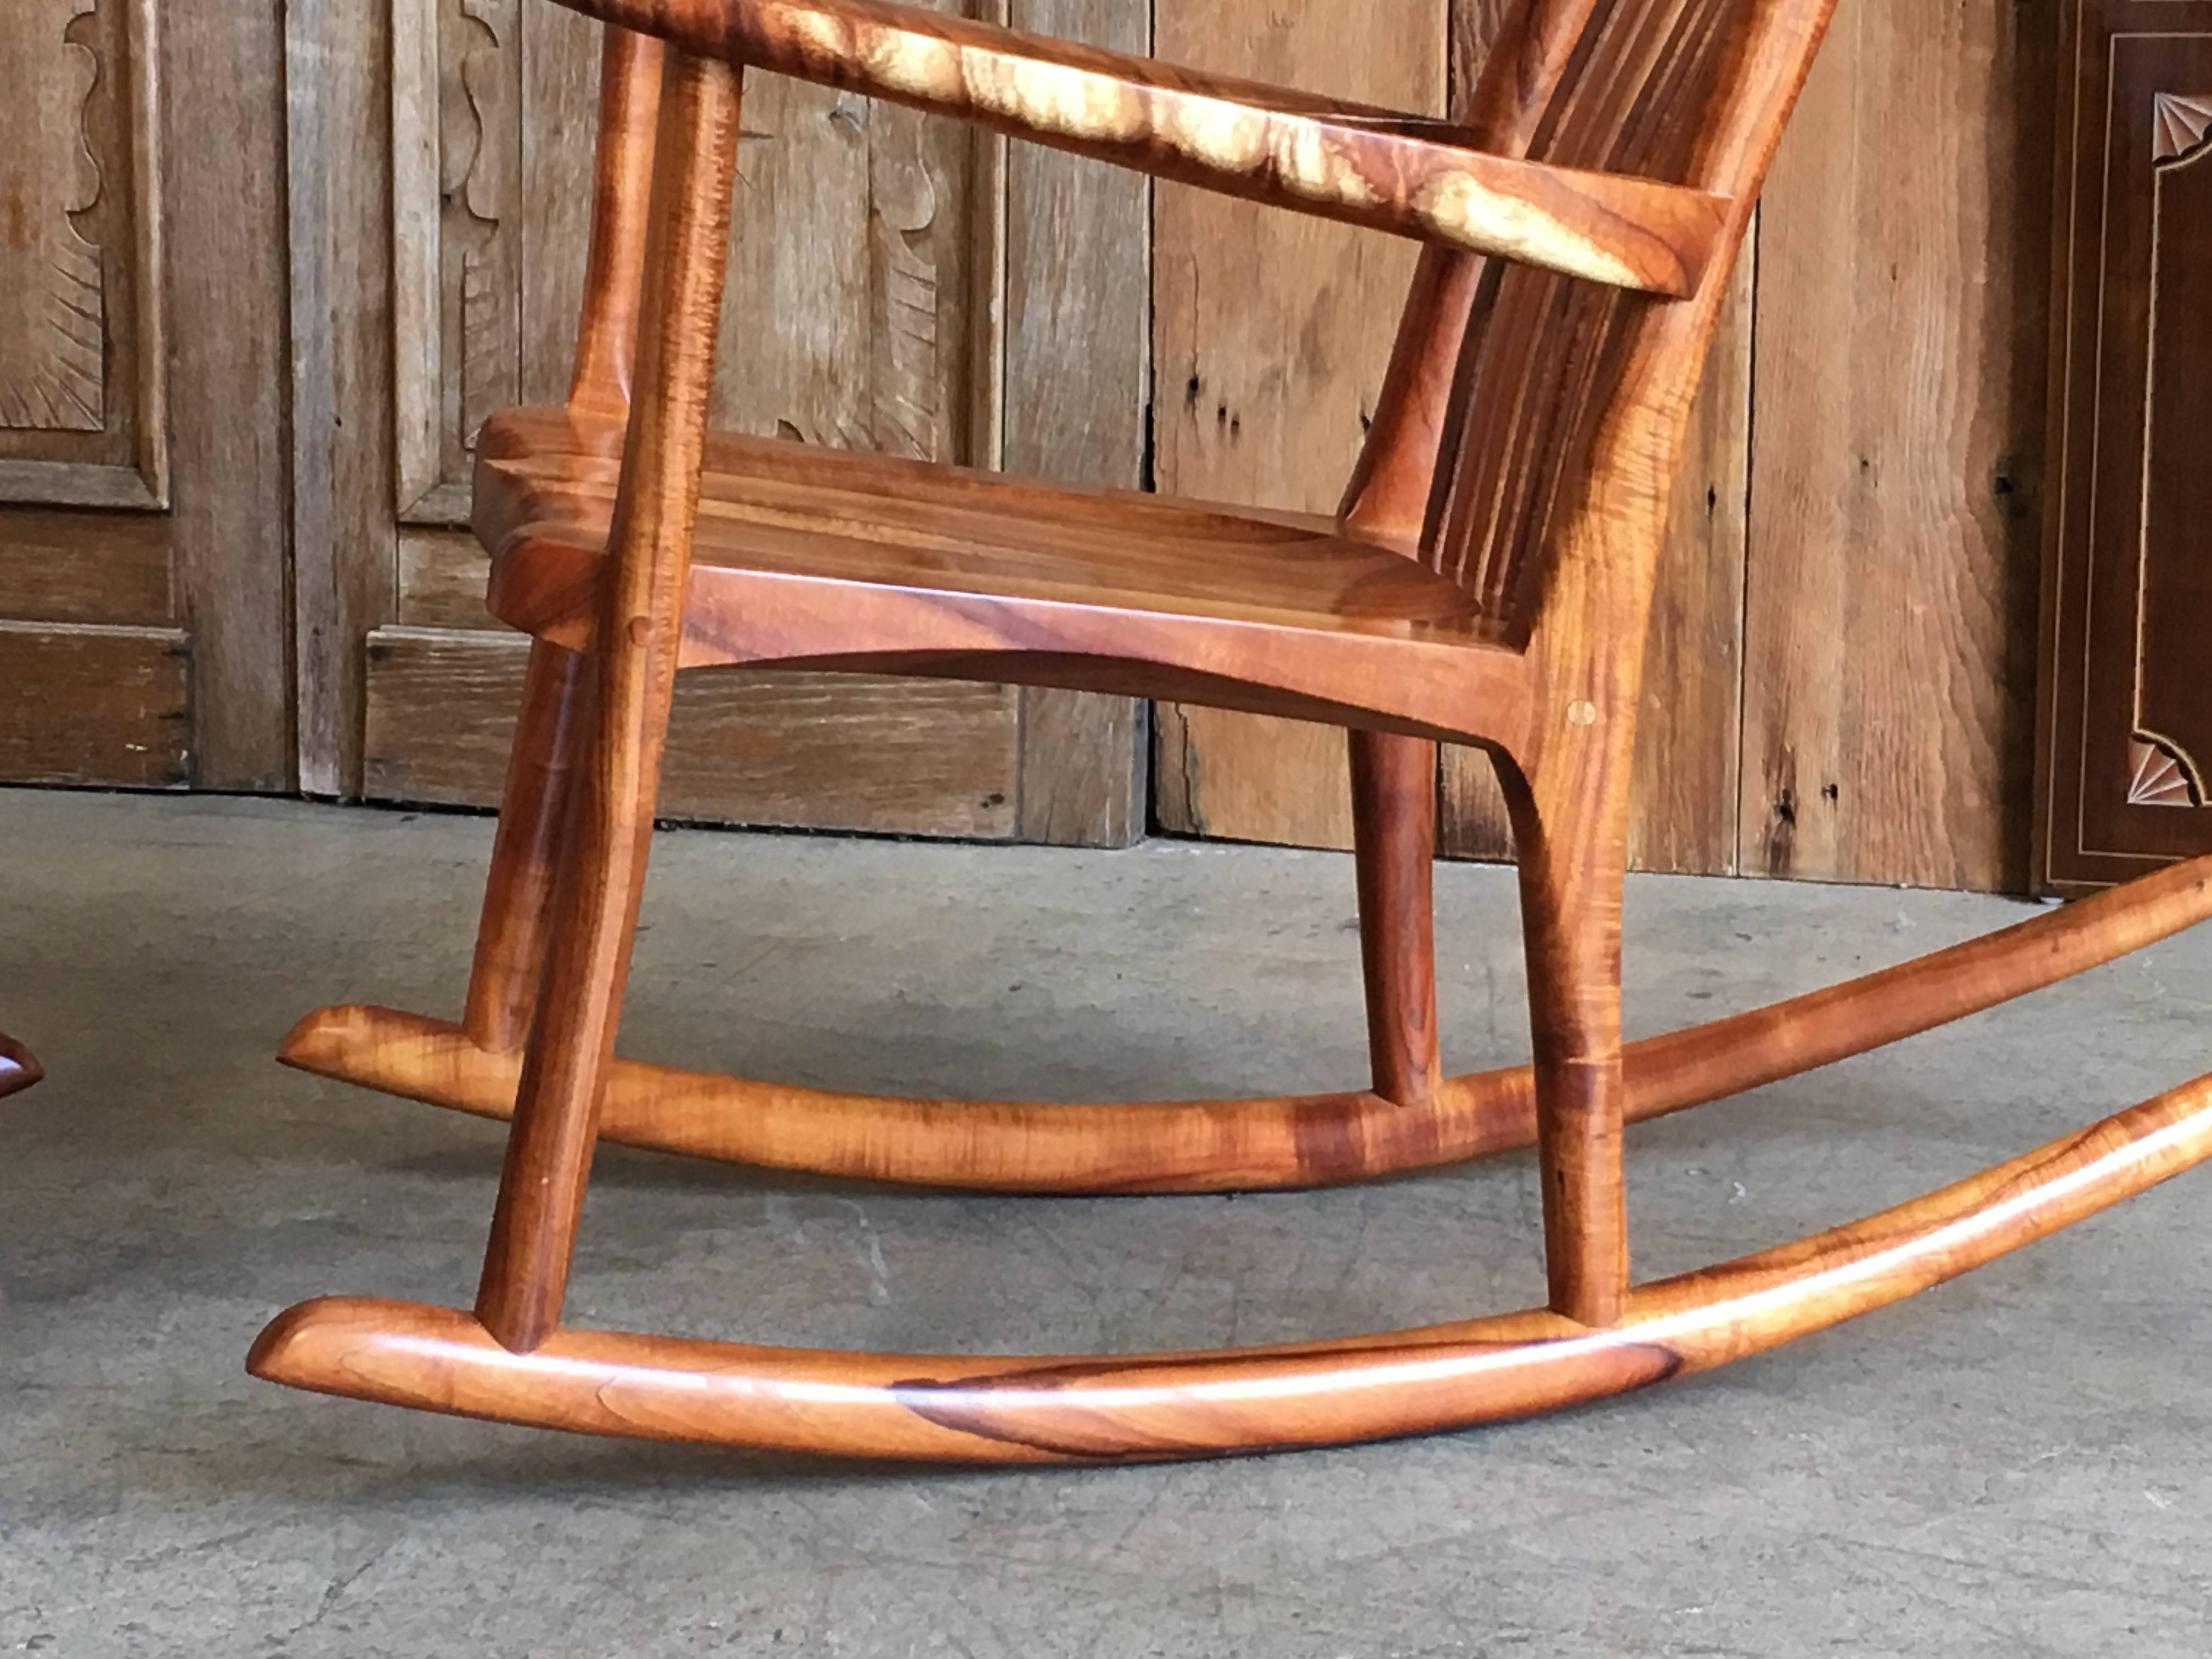 20th Century Studio Crafted Koa Wood Rocking Chairs by Stan Gollaher